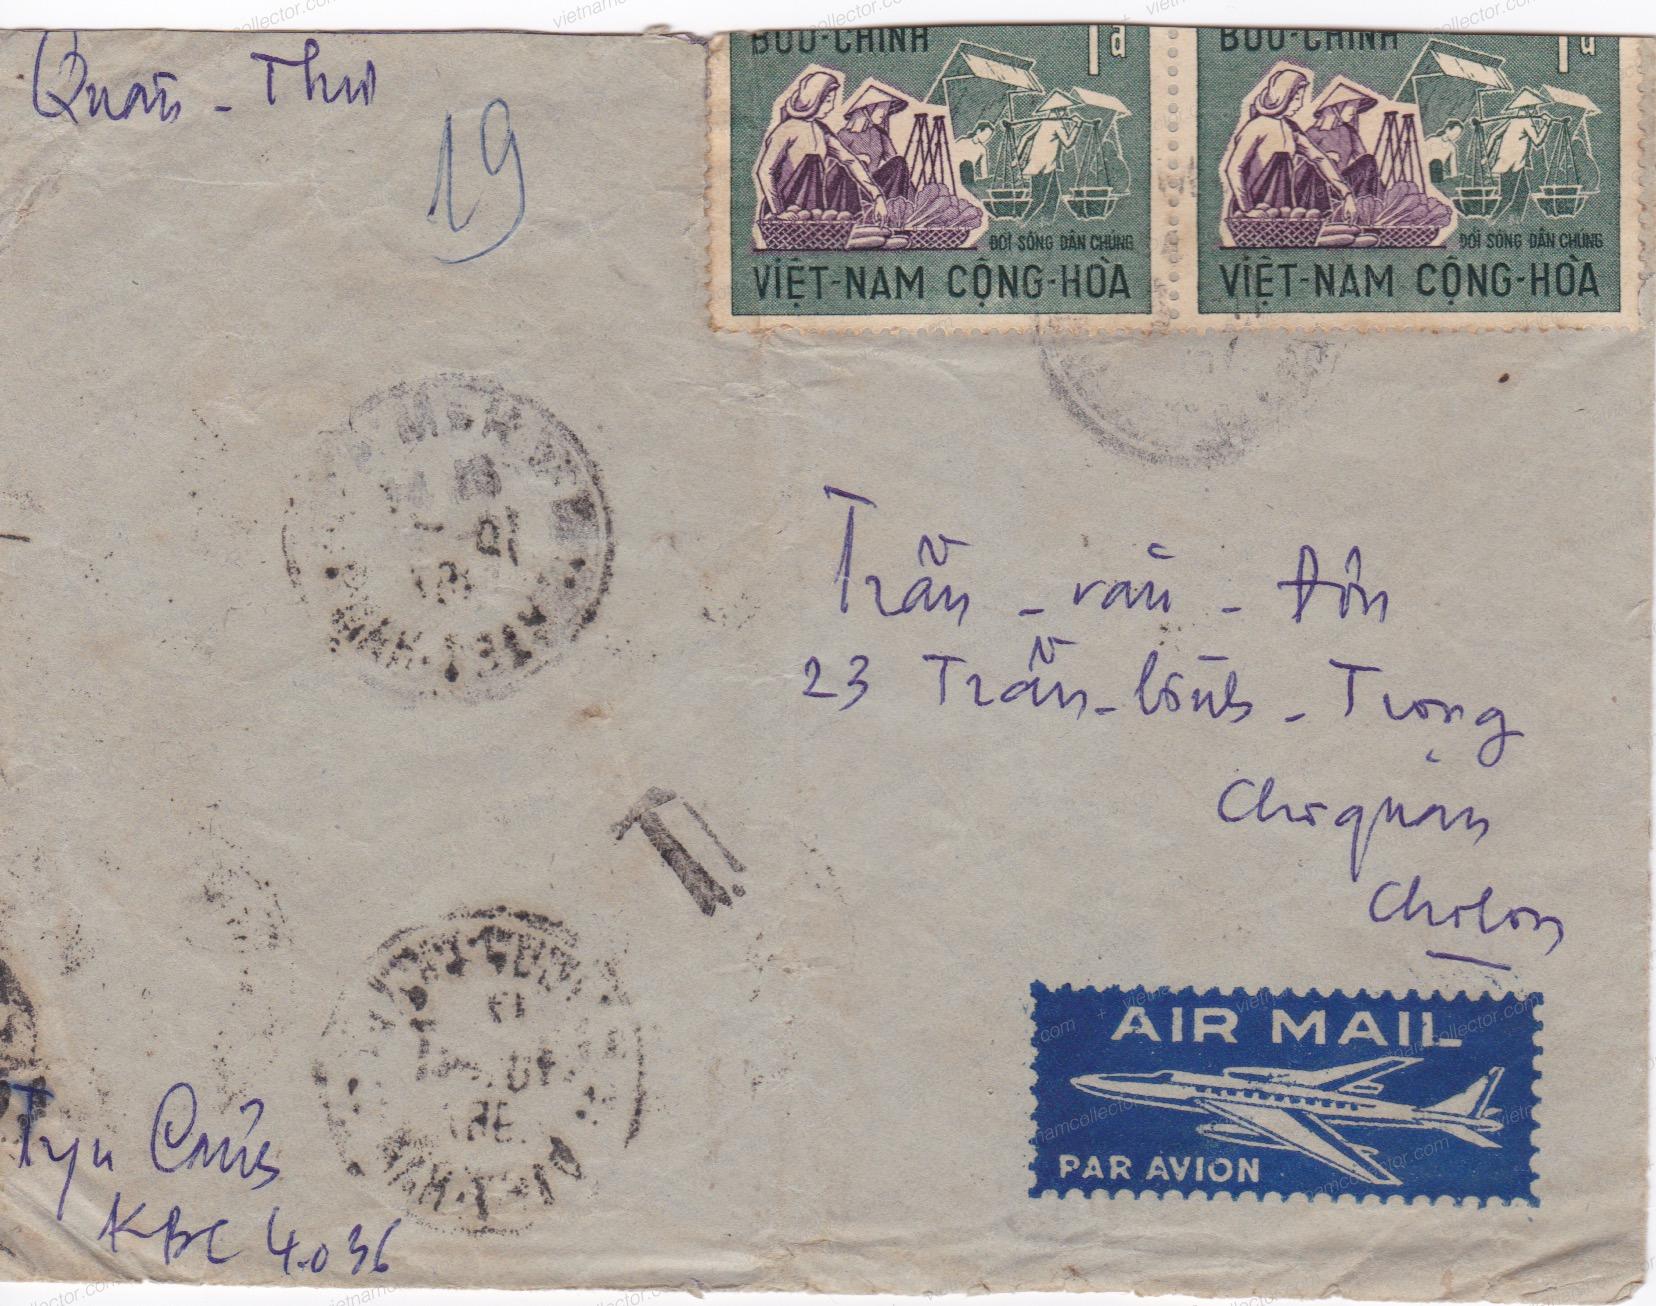 Was invalidating stamps considered under 1970 Postal Reorganization Act?